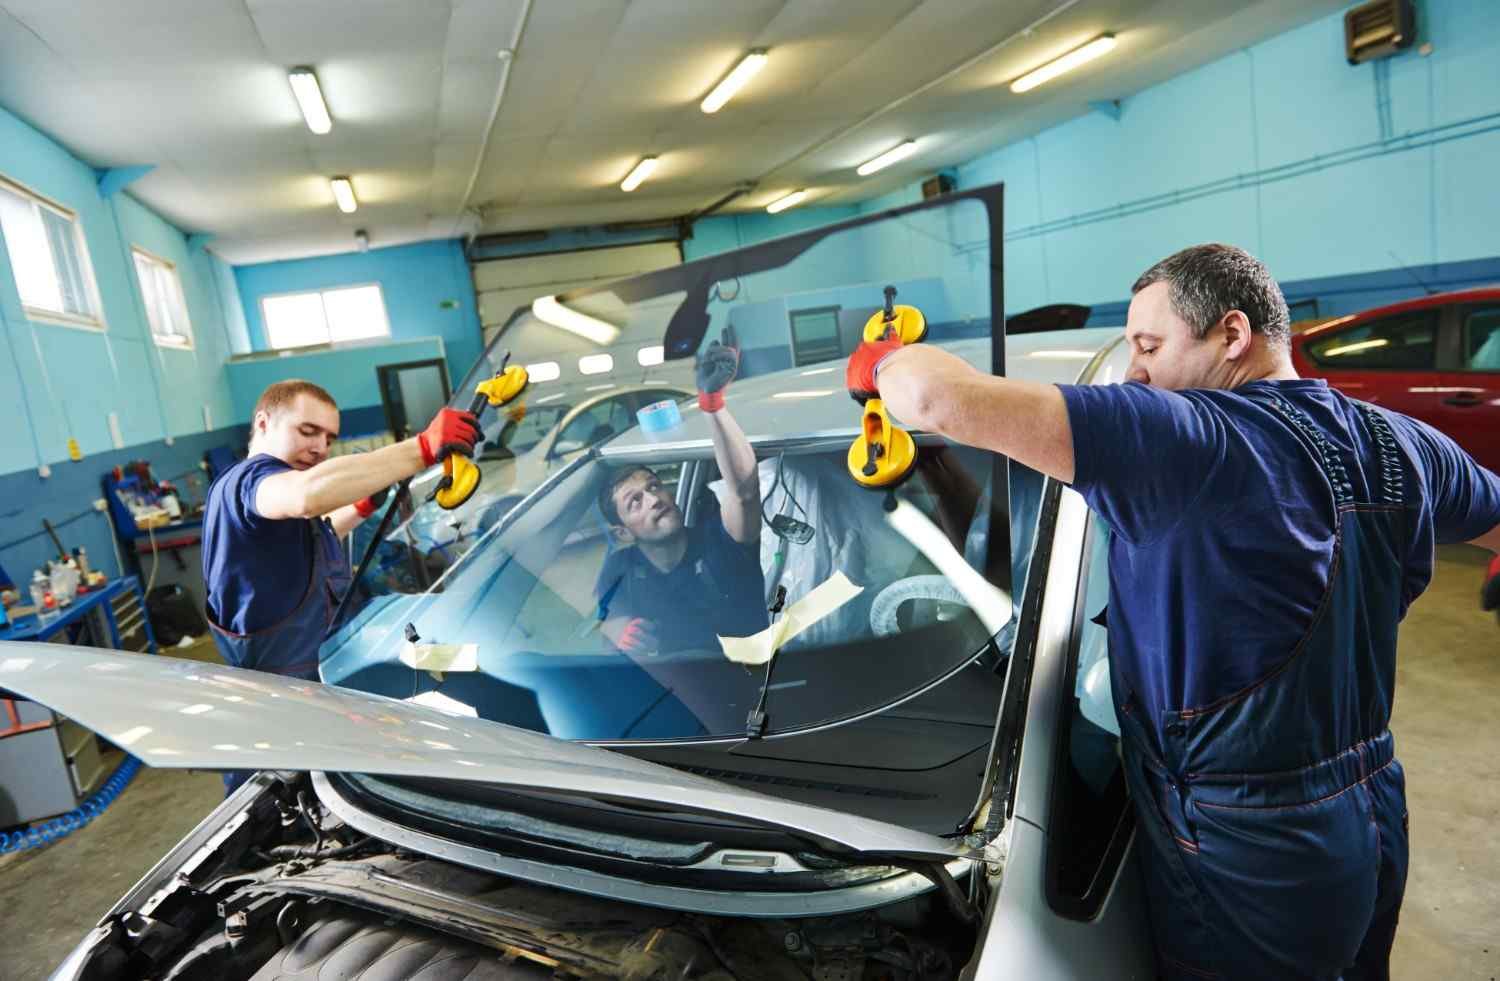 Secure Your Safety with Auto Glass Repair Services & Windshield Replacement in Downtown Las Vegas